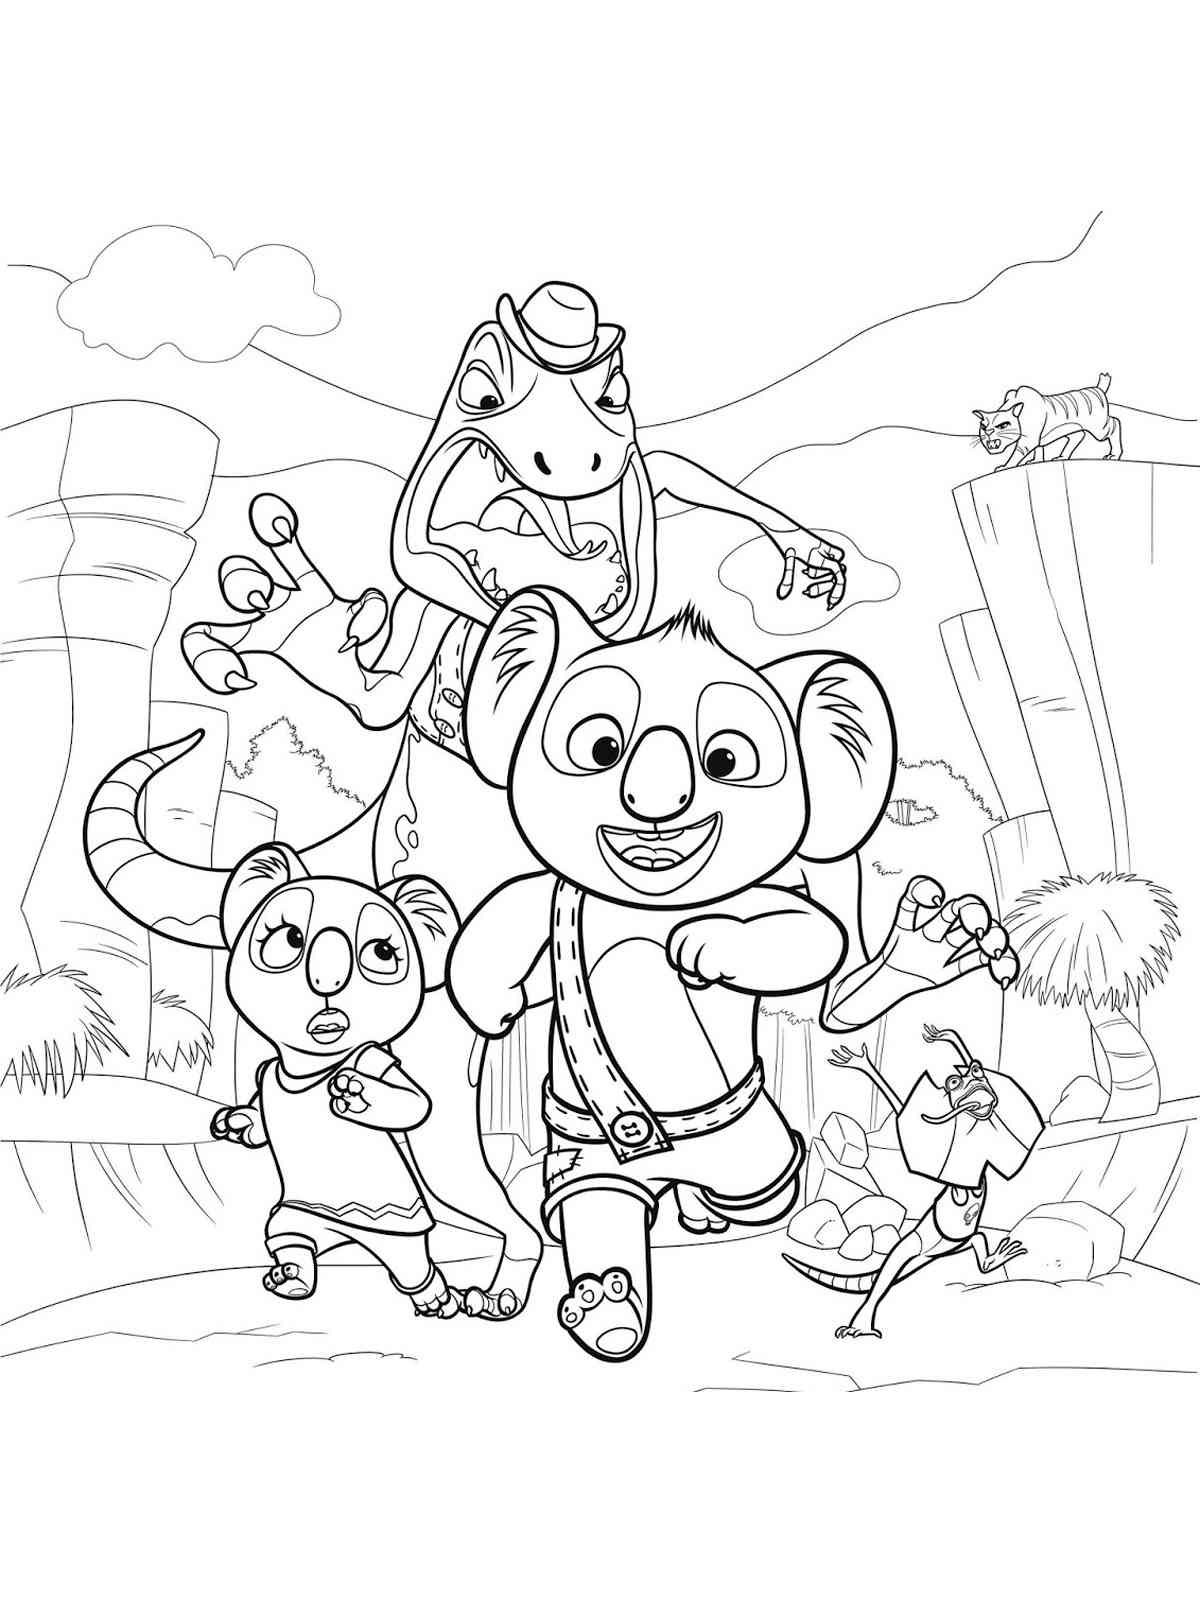 Blinky Bill 17 coloring page